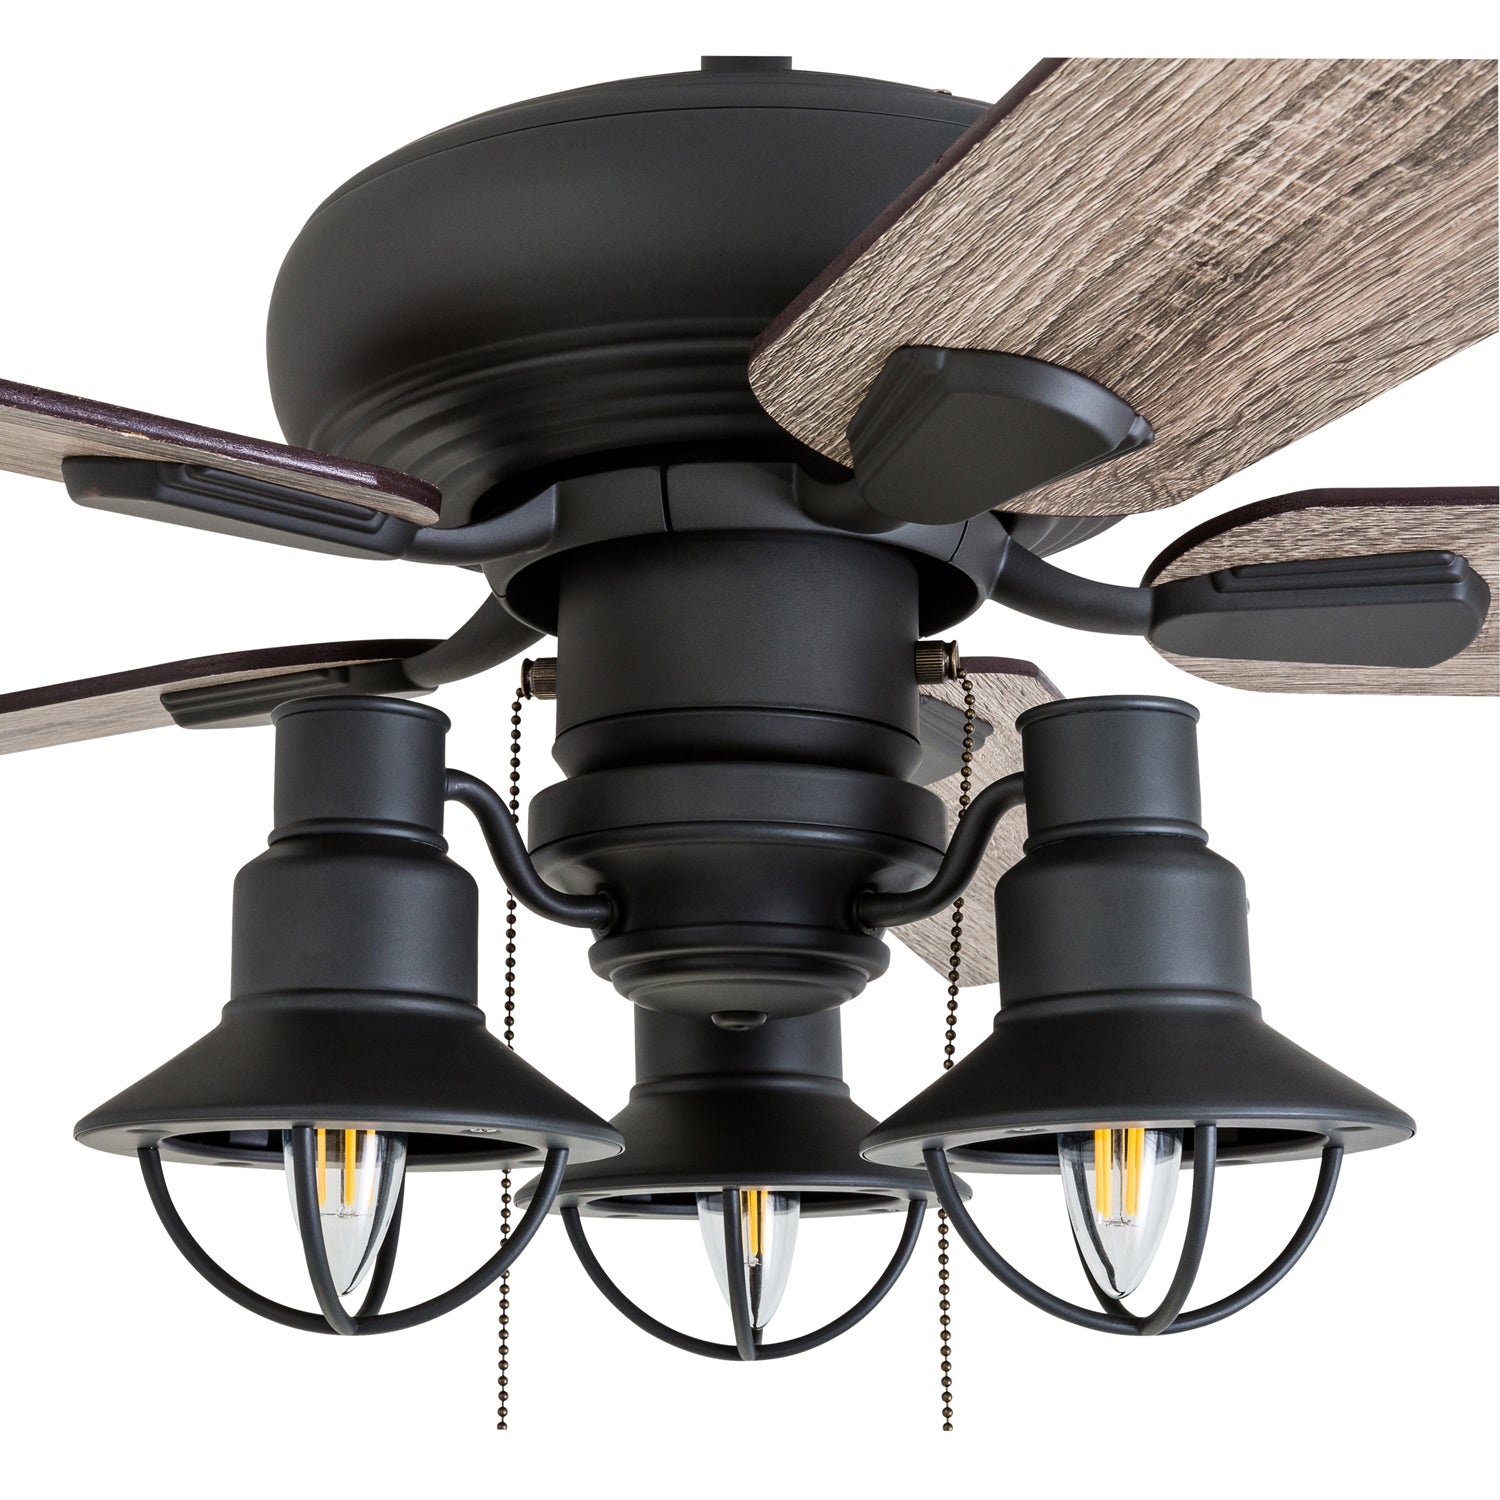 42 Inch Piercy, Bronze, Remote Control, Ceiling Fan by Prominence Home